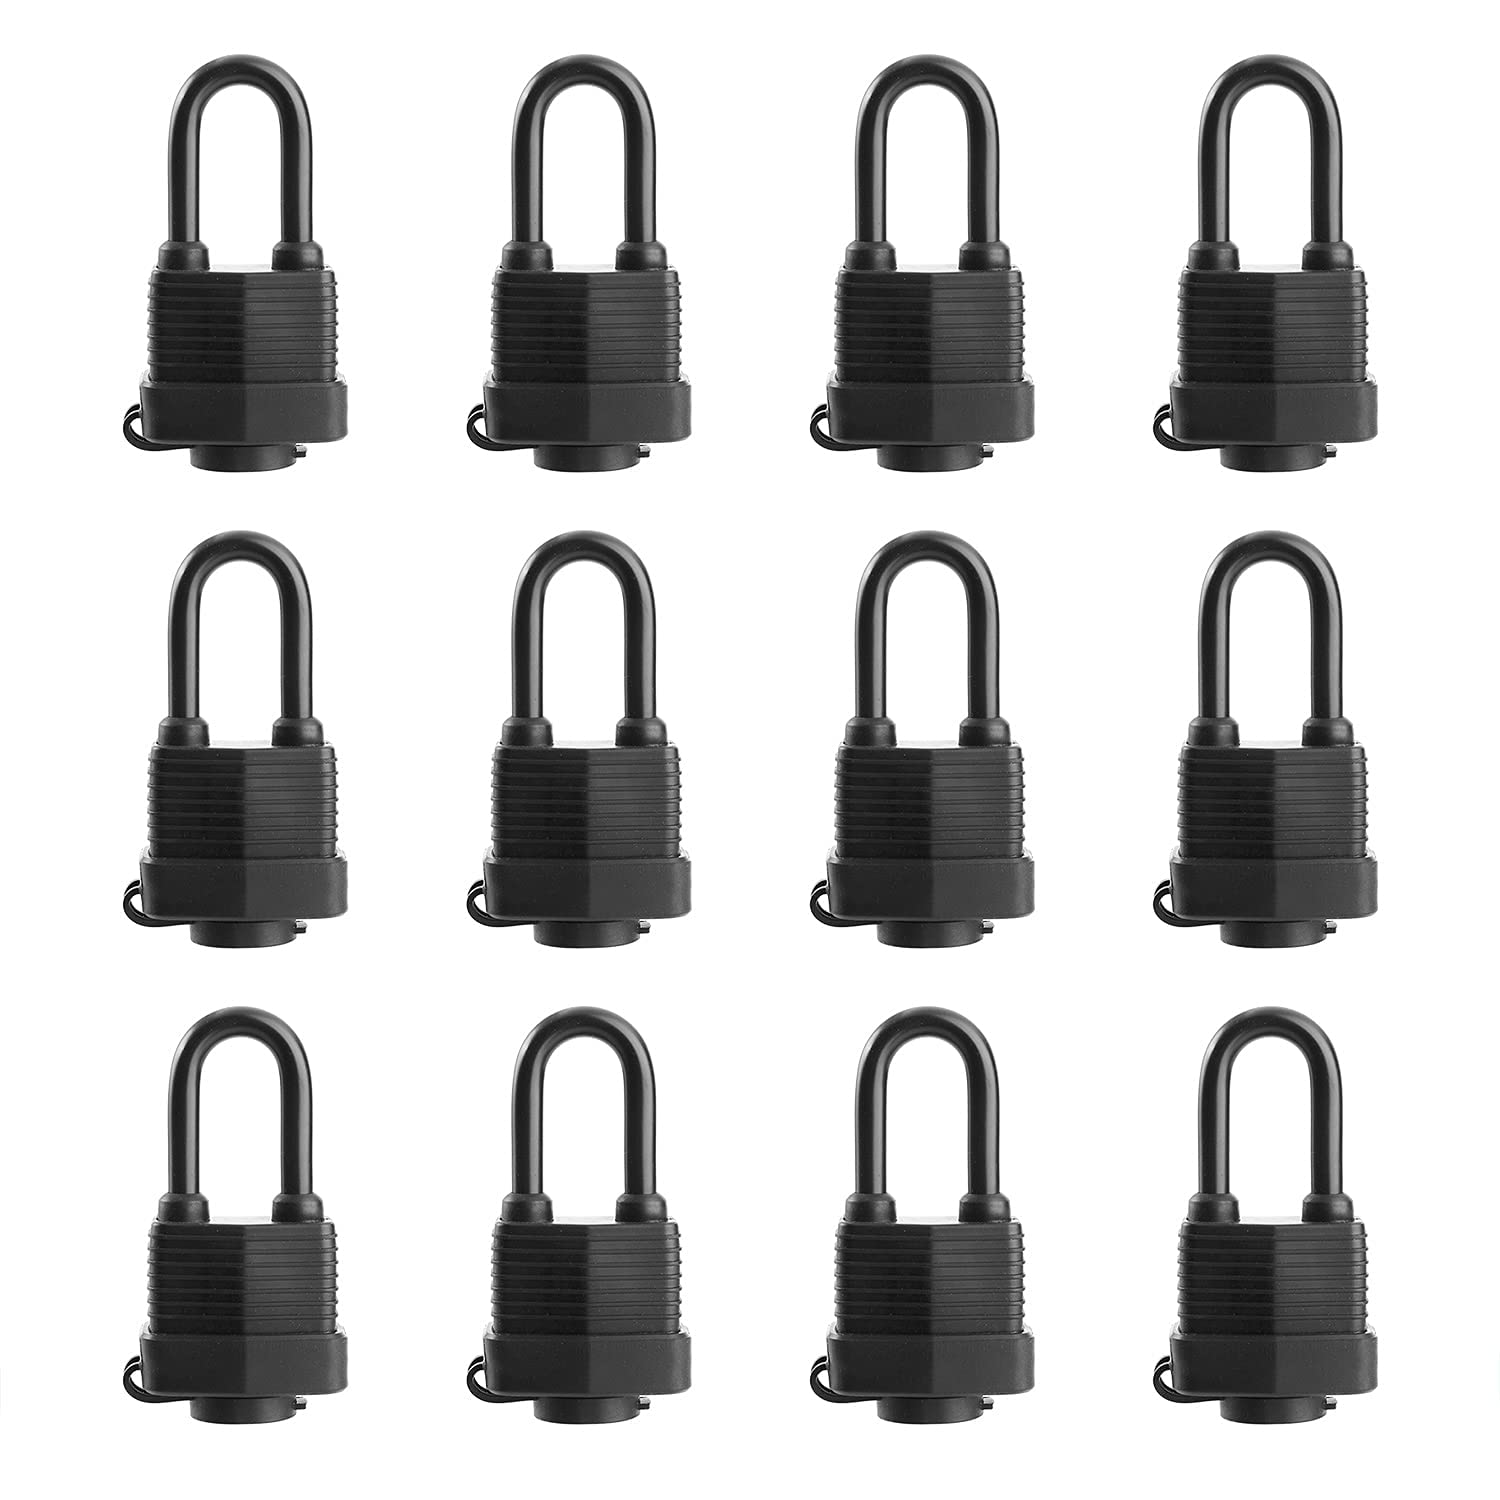 Safiswords Waterproof Padlocks Keyed Alike For Outdoor Use, Heavy Duty Laminated Steel Lock Body With Plastic Covered, 1-916 Inc